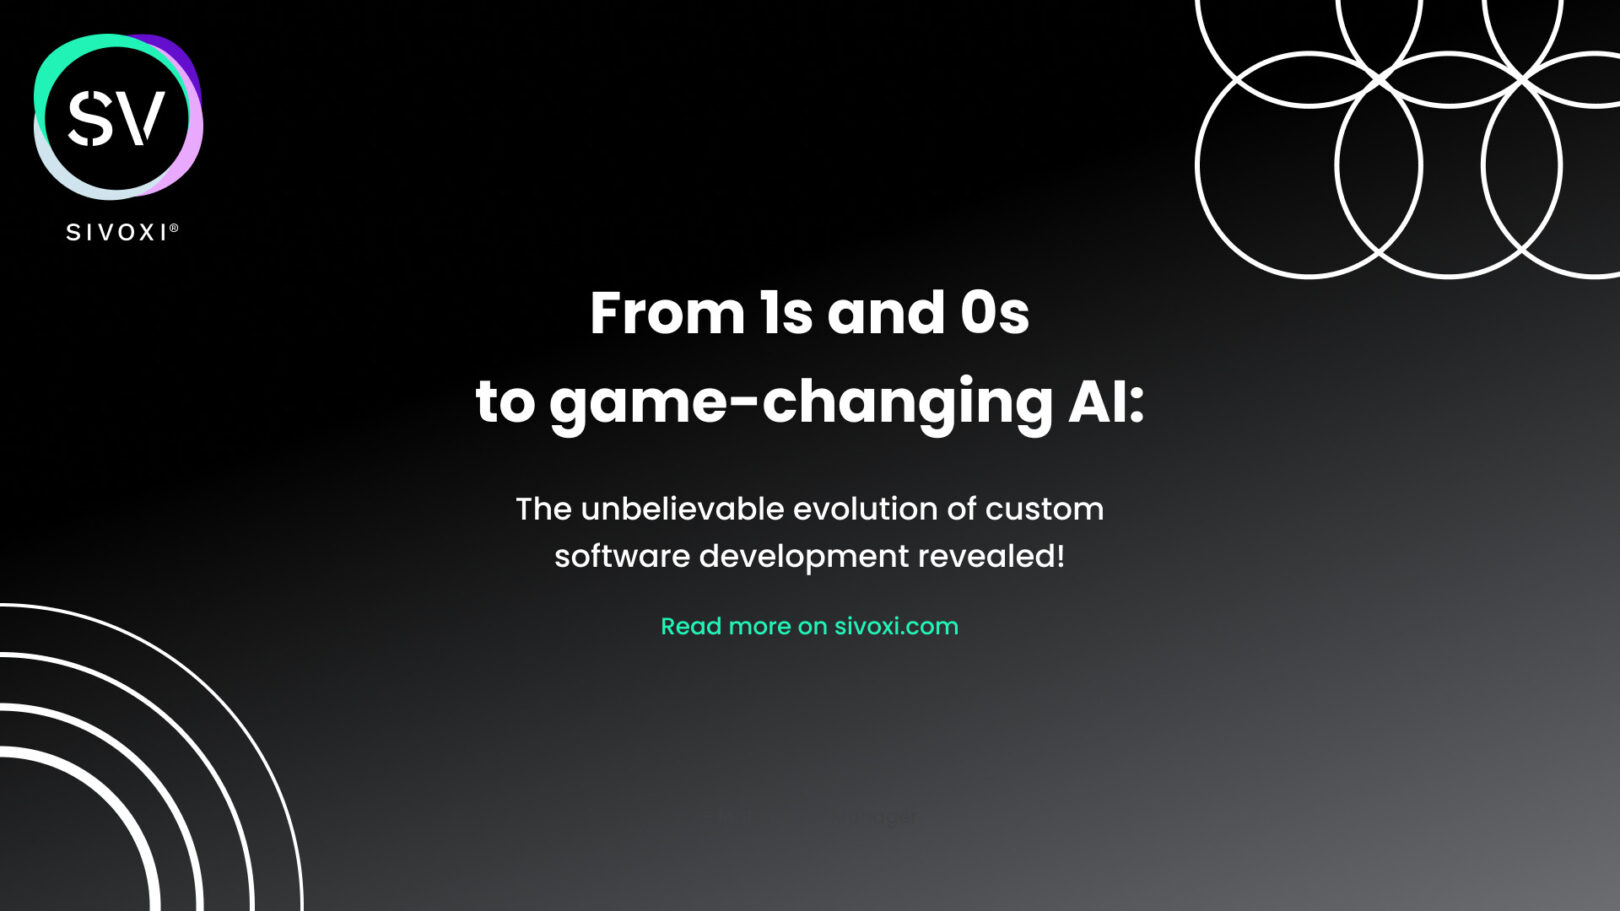 From 1s and 0s to game-changing AI: The unbelievable evolution of custom software development revealed!